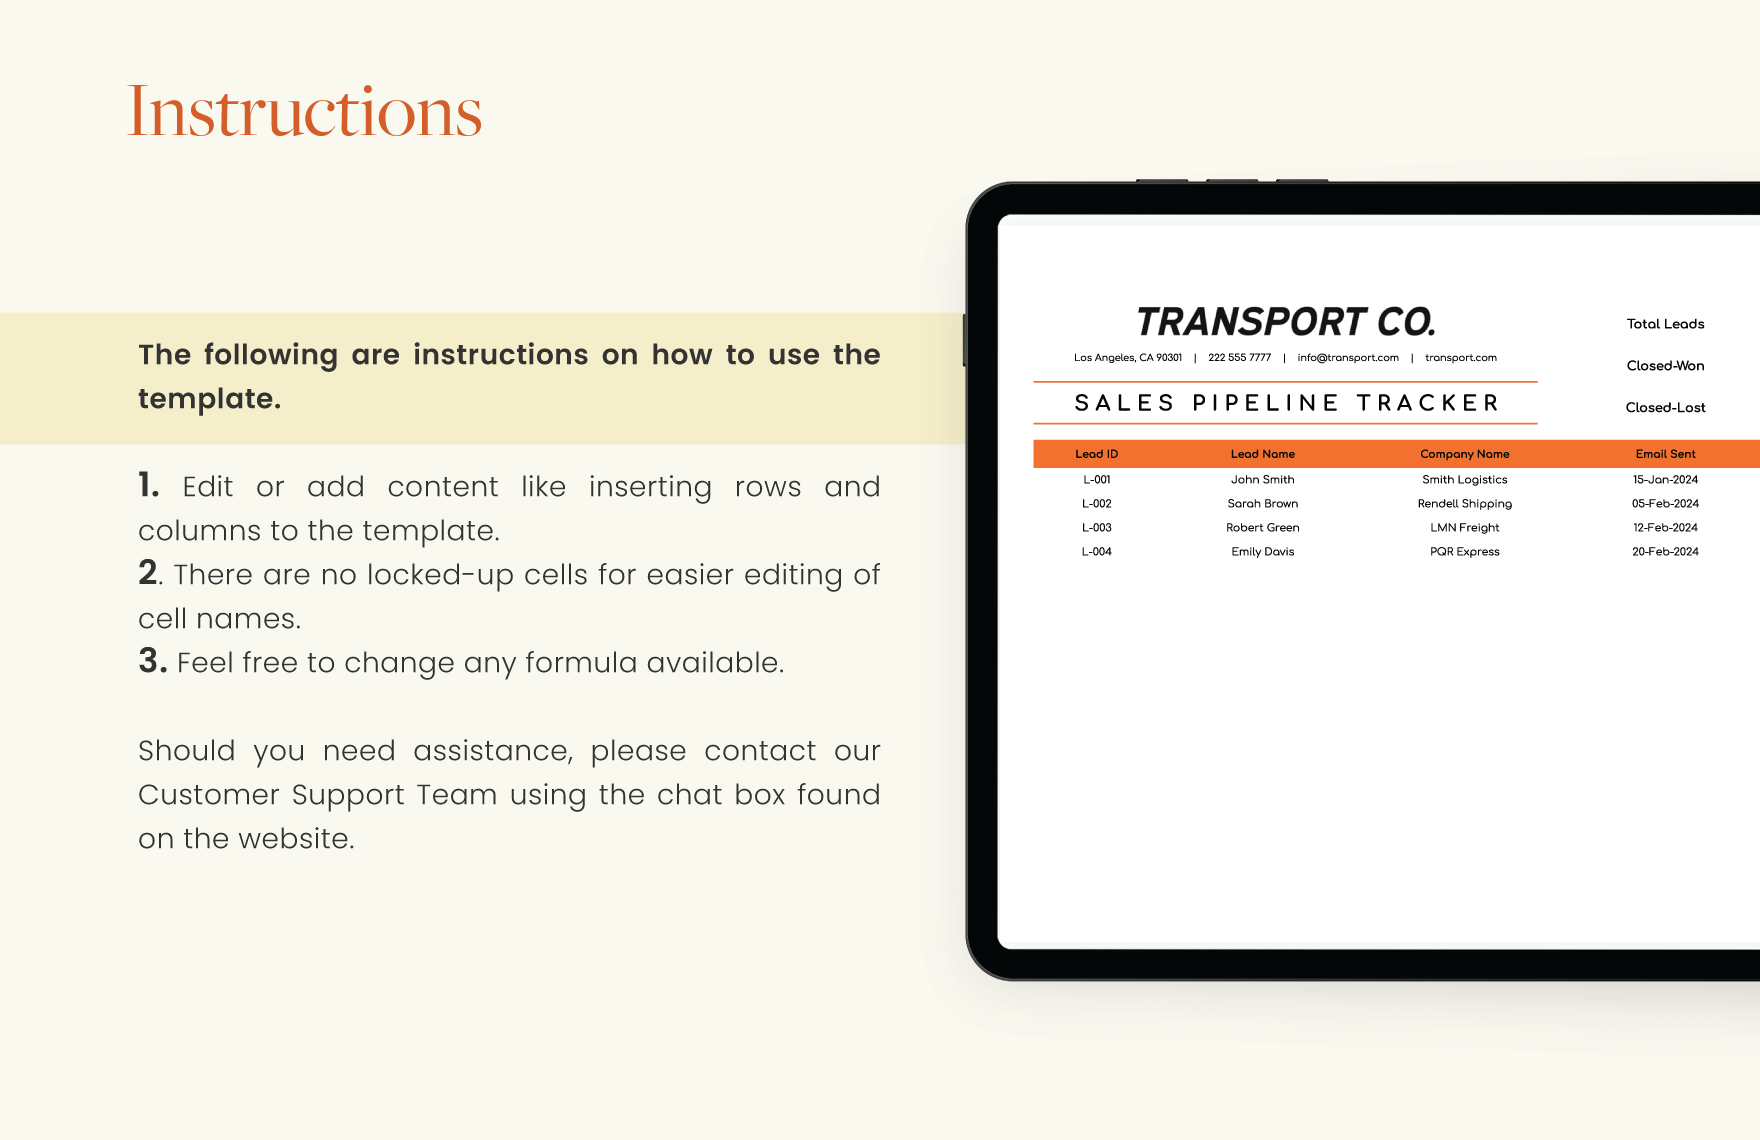 Transport and Logistics Sales Pipeline Tracker Template